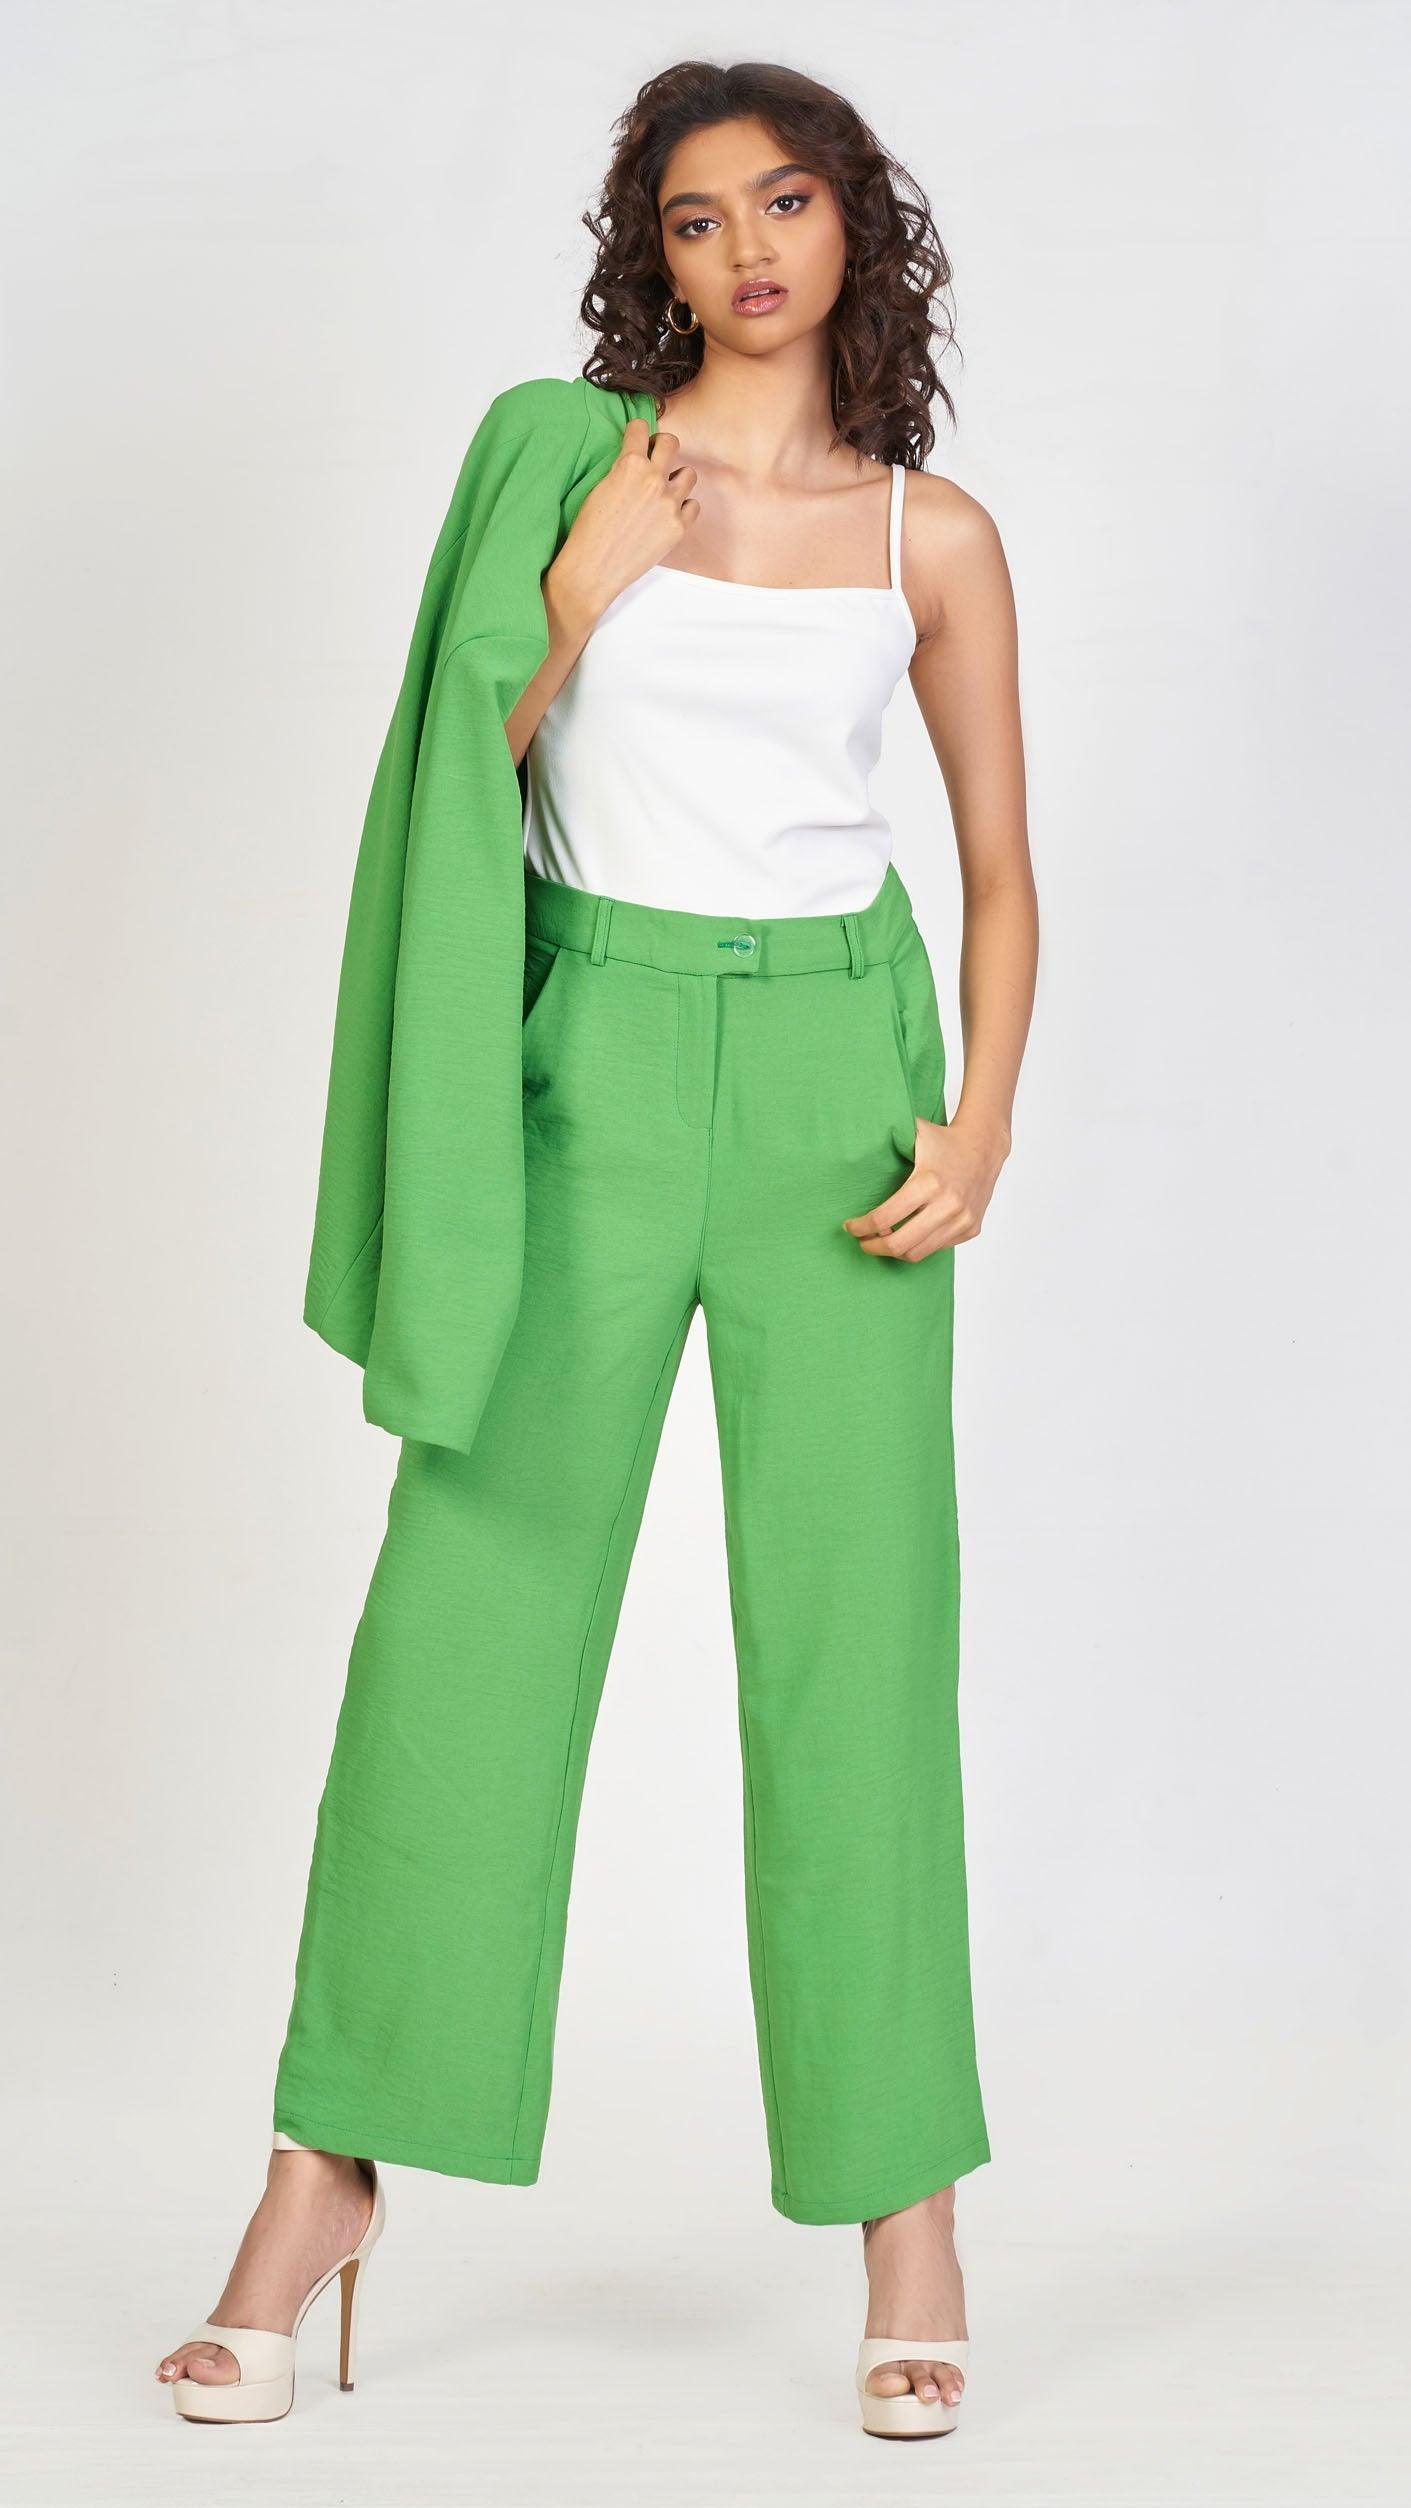 All green power suit pant